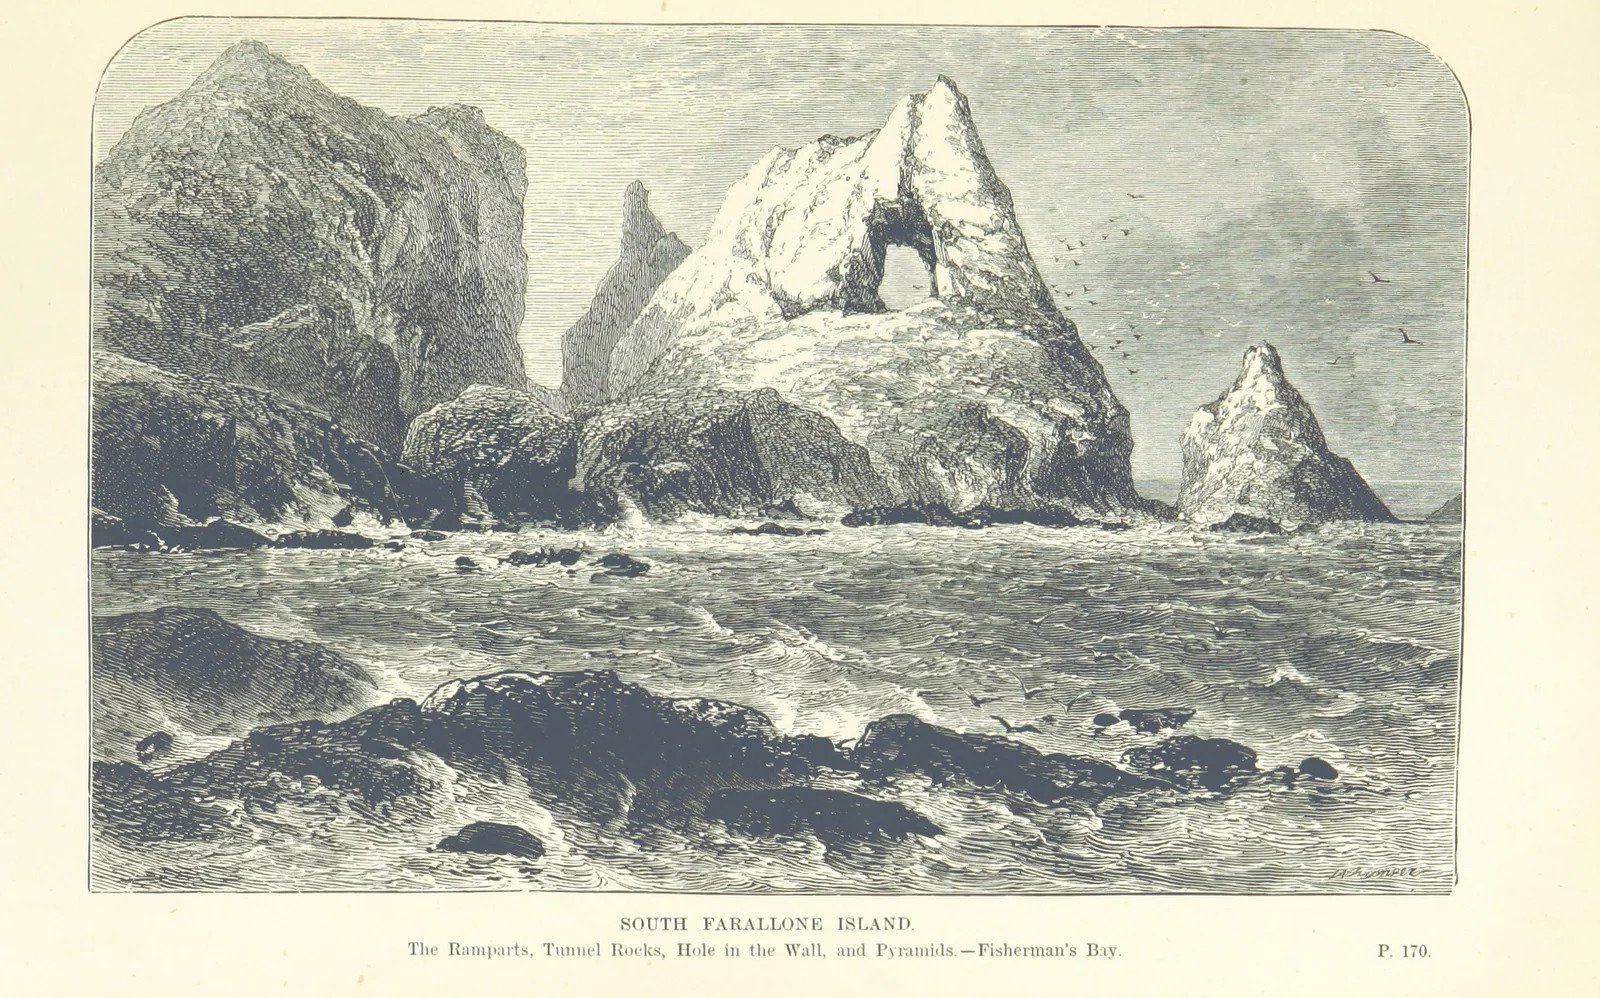 Etching of The South Farallon Island